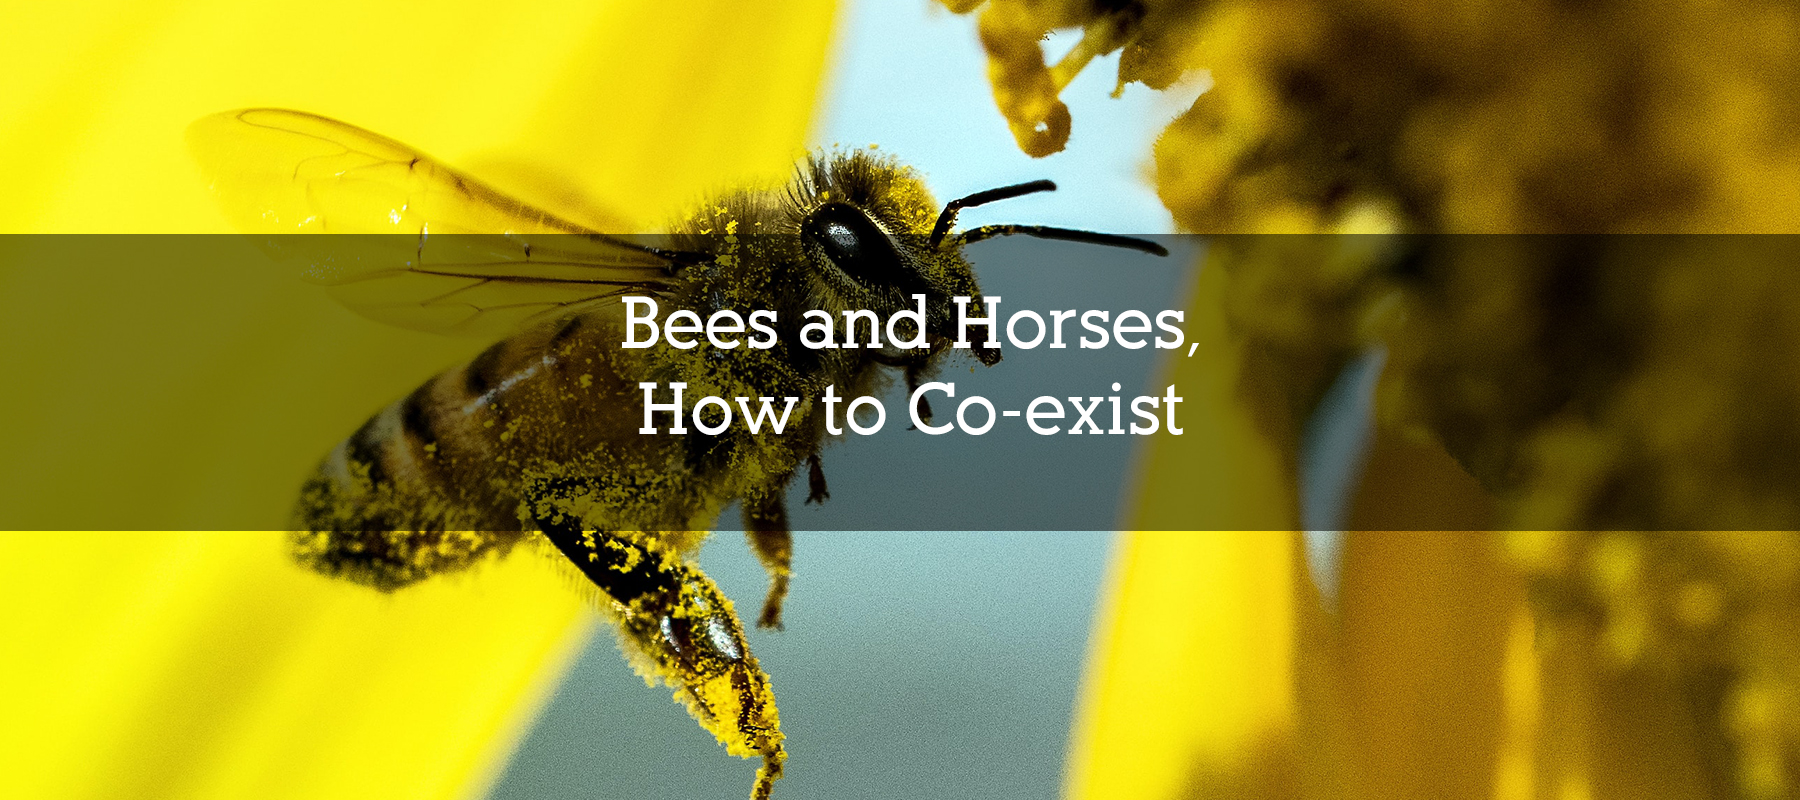 Bees and Horses, How to Coexist